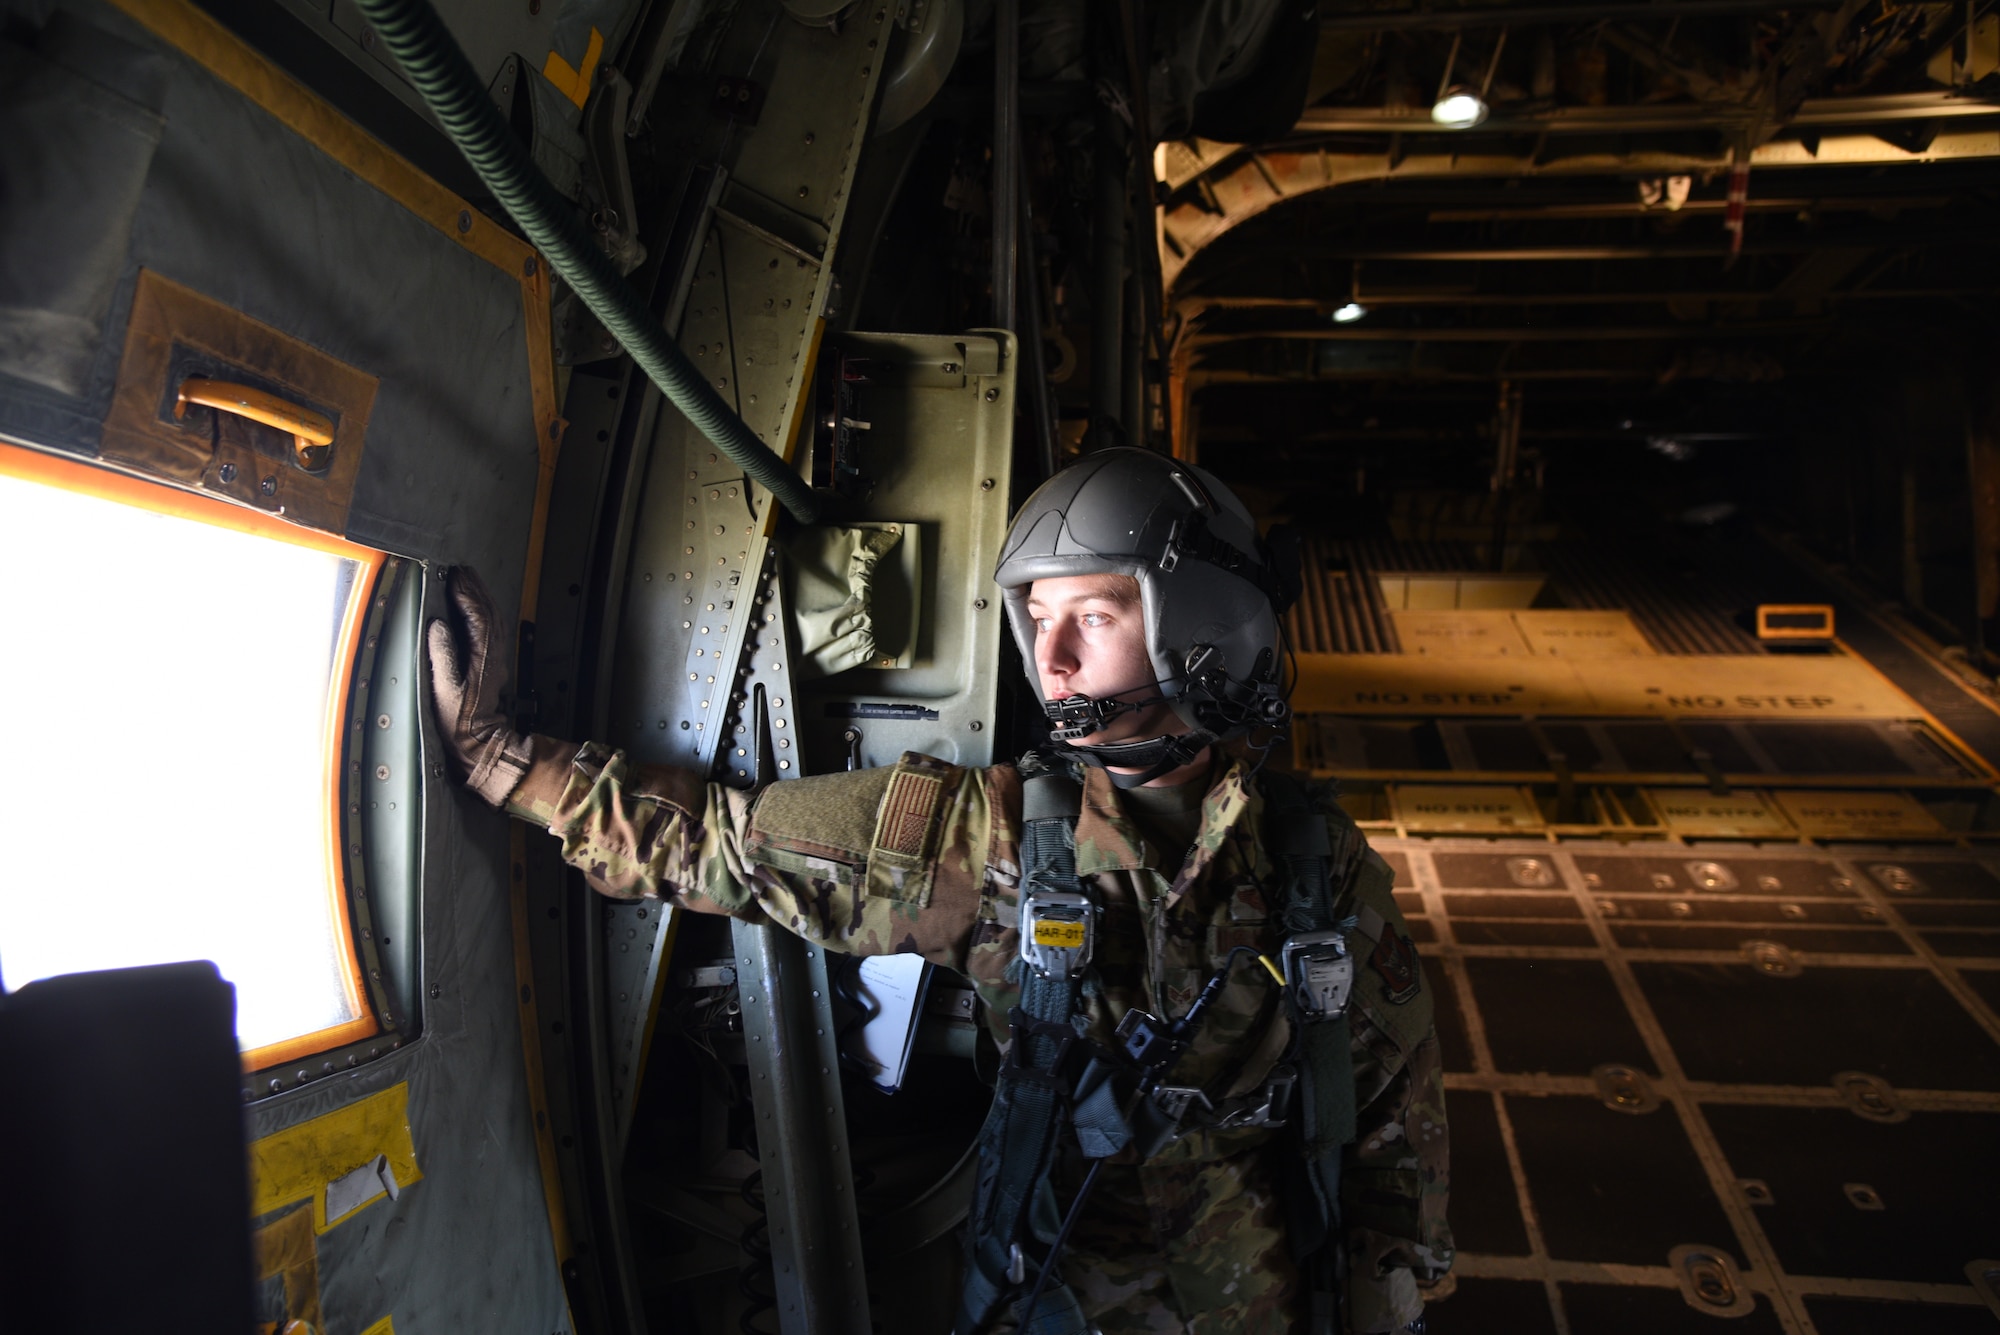 Senior Airman Kaleb Walker, 757th Airlift Squadron loadmaster, waits at the troop door until it is time to open the cargo ramp where the 10th Special Forces Group paratroopers will complete their jump during the 22nd Air Force’s flagship exercise Rally in the Rockies Sept. 13-17, 2021. The exercise is designed to develop Airmen for combat operations by challenging them with realistic scenarios that support a full spectrum of operations during military actions, operations or hostile environments. (U.S. Air Force photo by Master Sgt. Jessica Kendziorek)